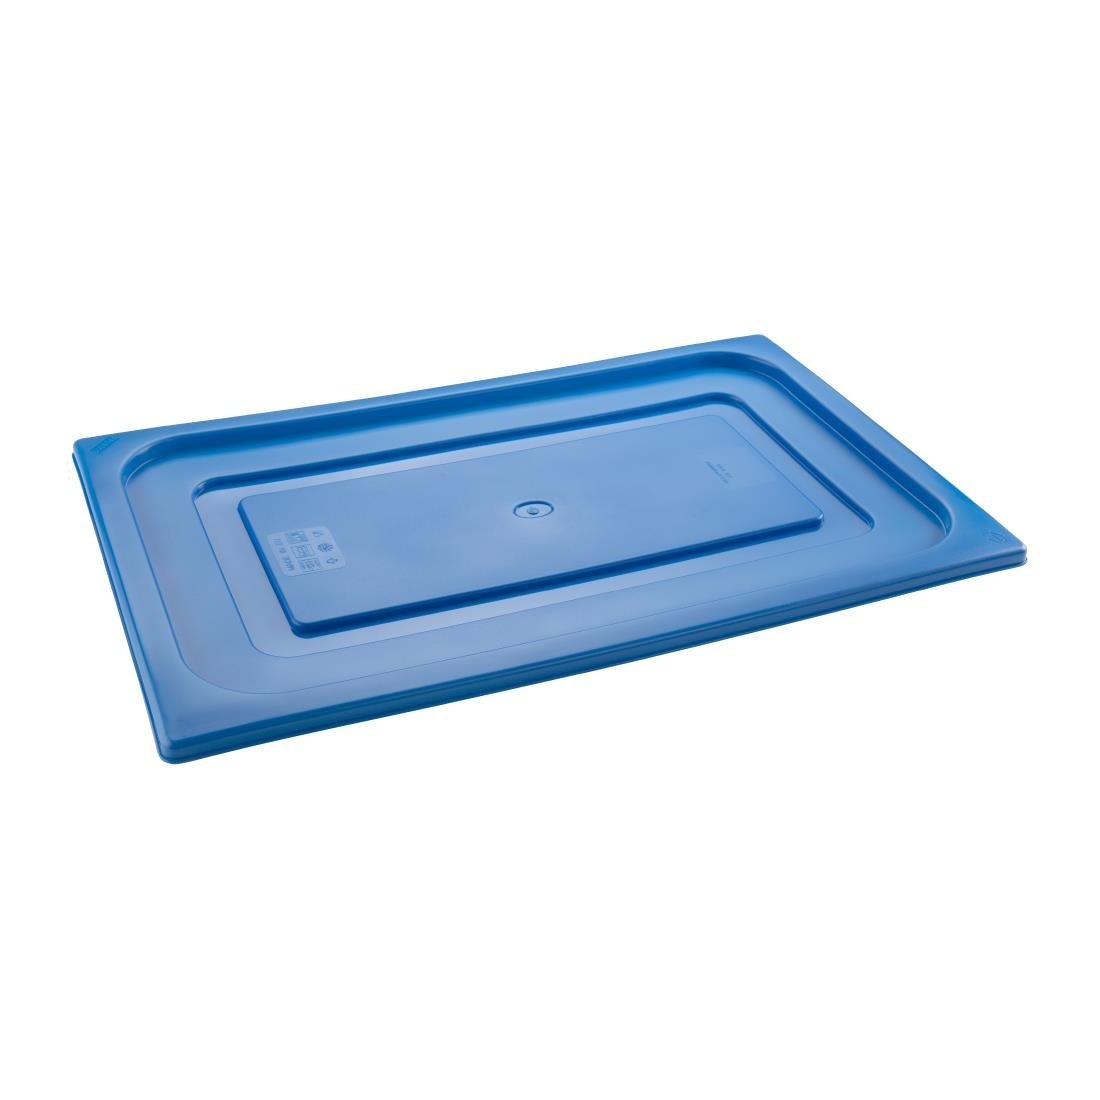 HT898 Pujadas Blue Polinorm Gastronorm Lid 1/6GN